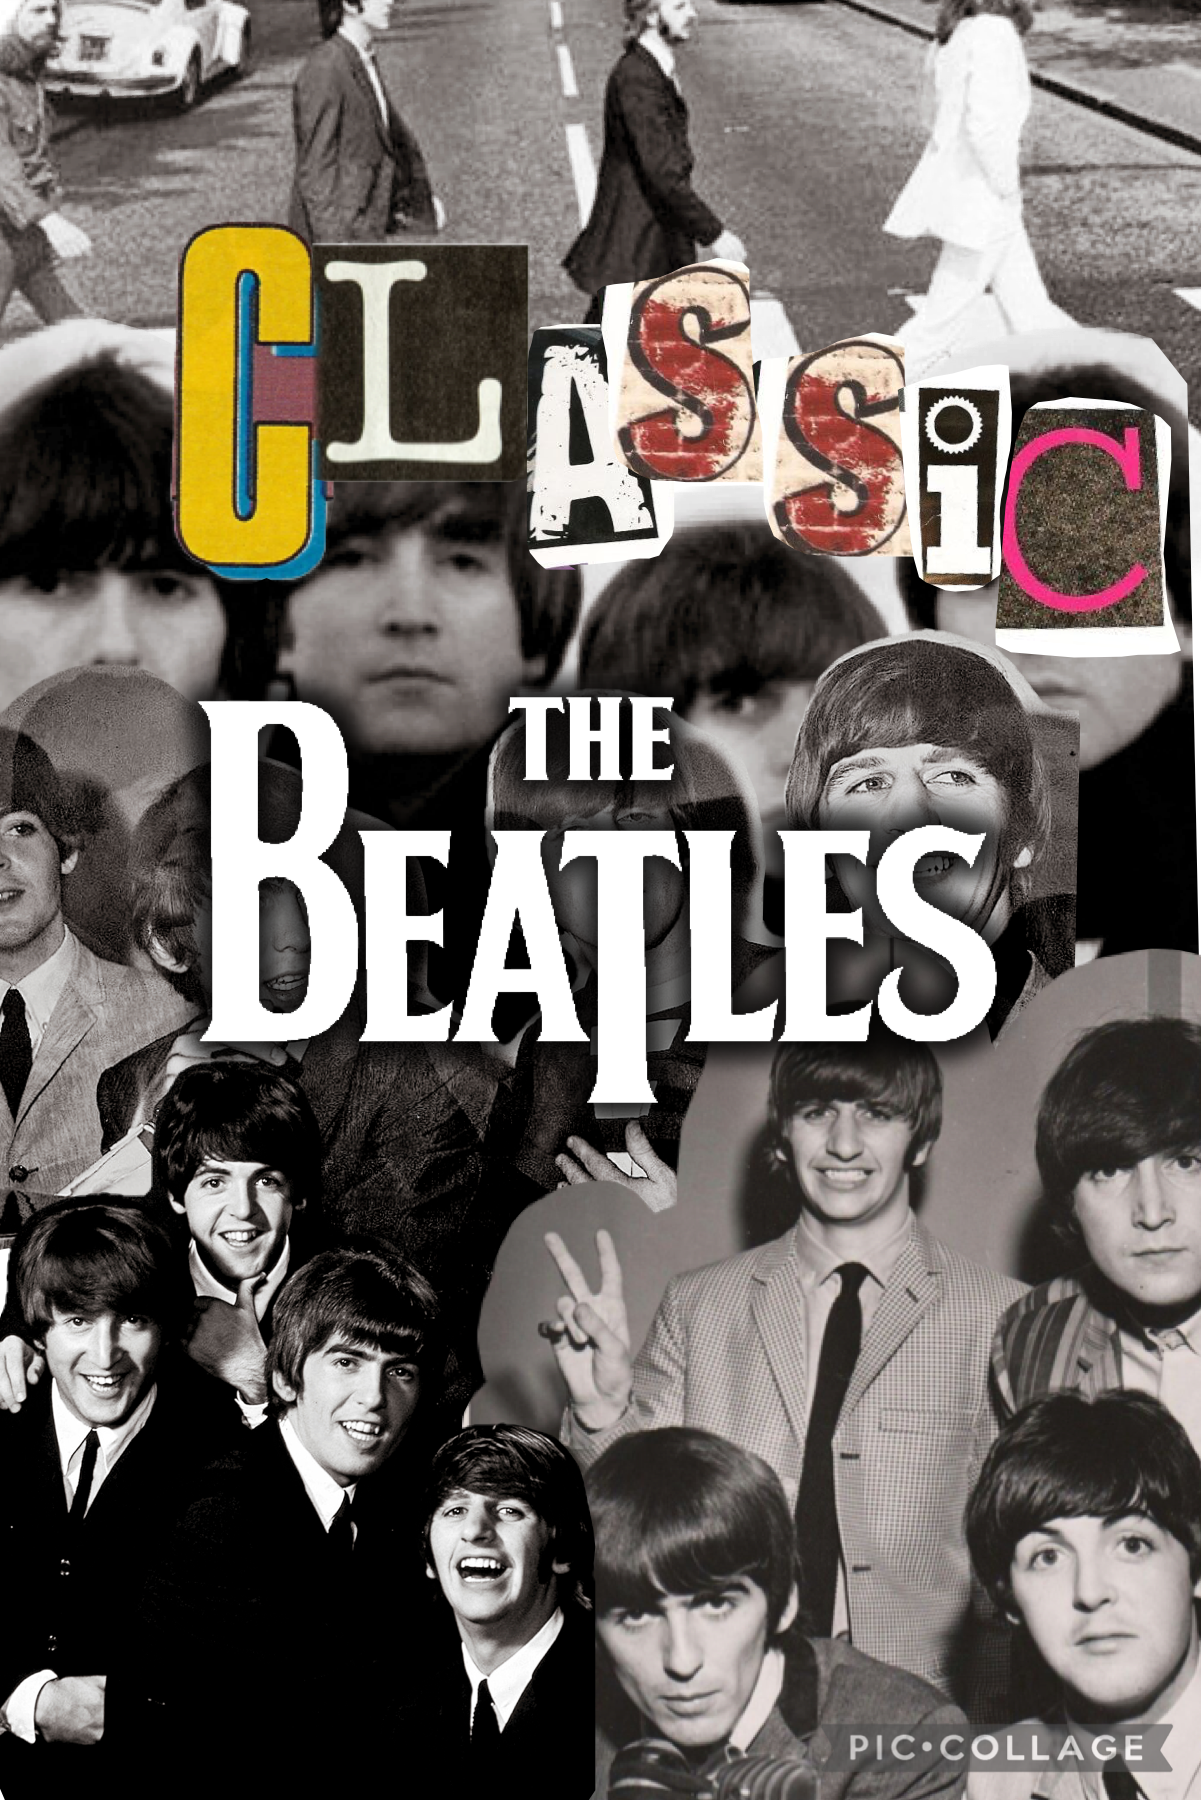 ~the beatles~ 
Hello! Friends it’s hilary!!!!! Well this collage is from one of my fav bands of all time! My favorite song by them is yellow subarine! Well this band is called the beatles and i hope you have an amazing day or night !